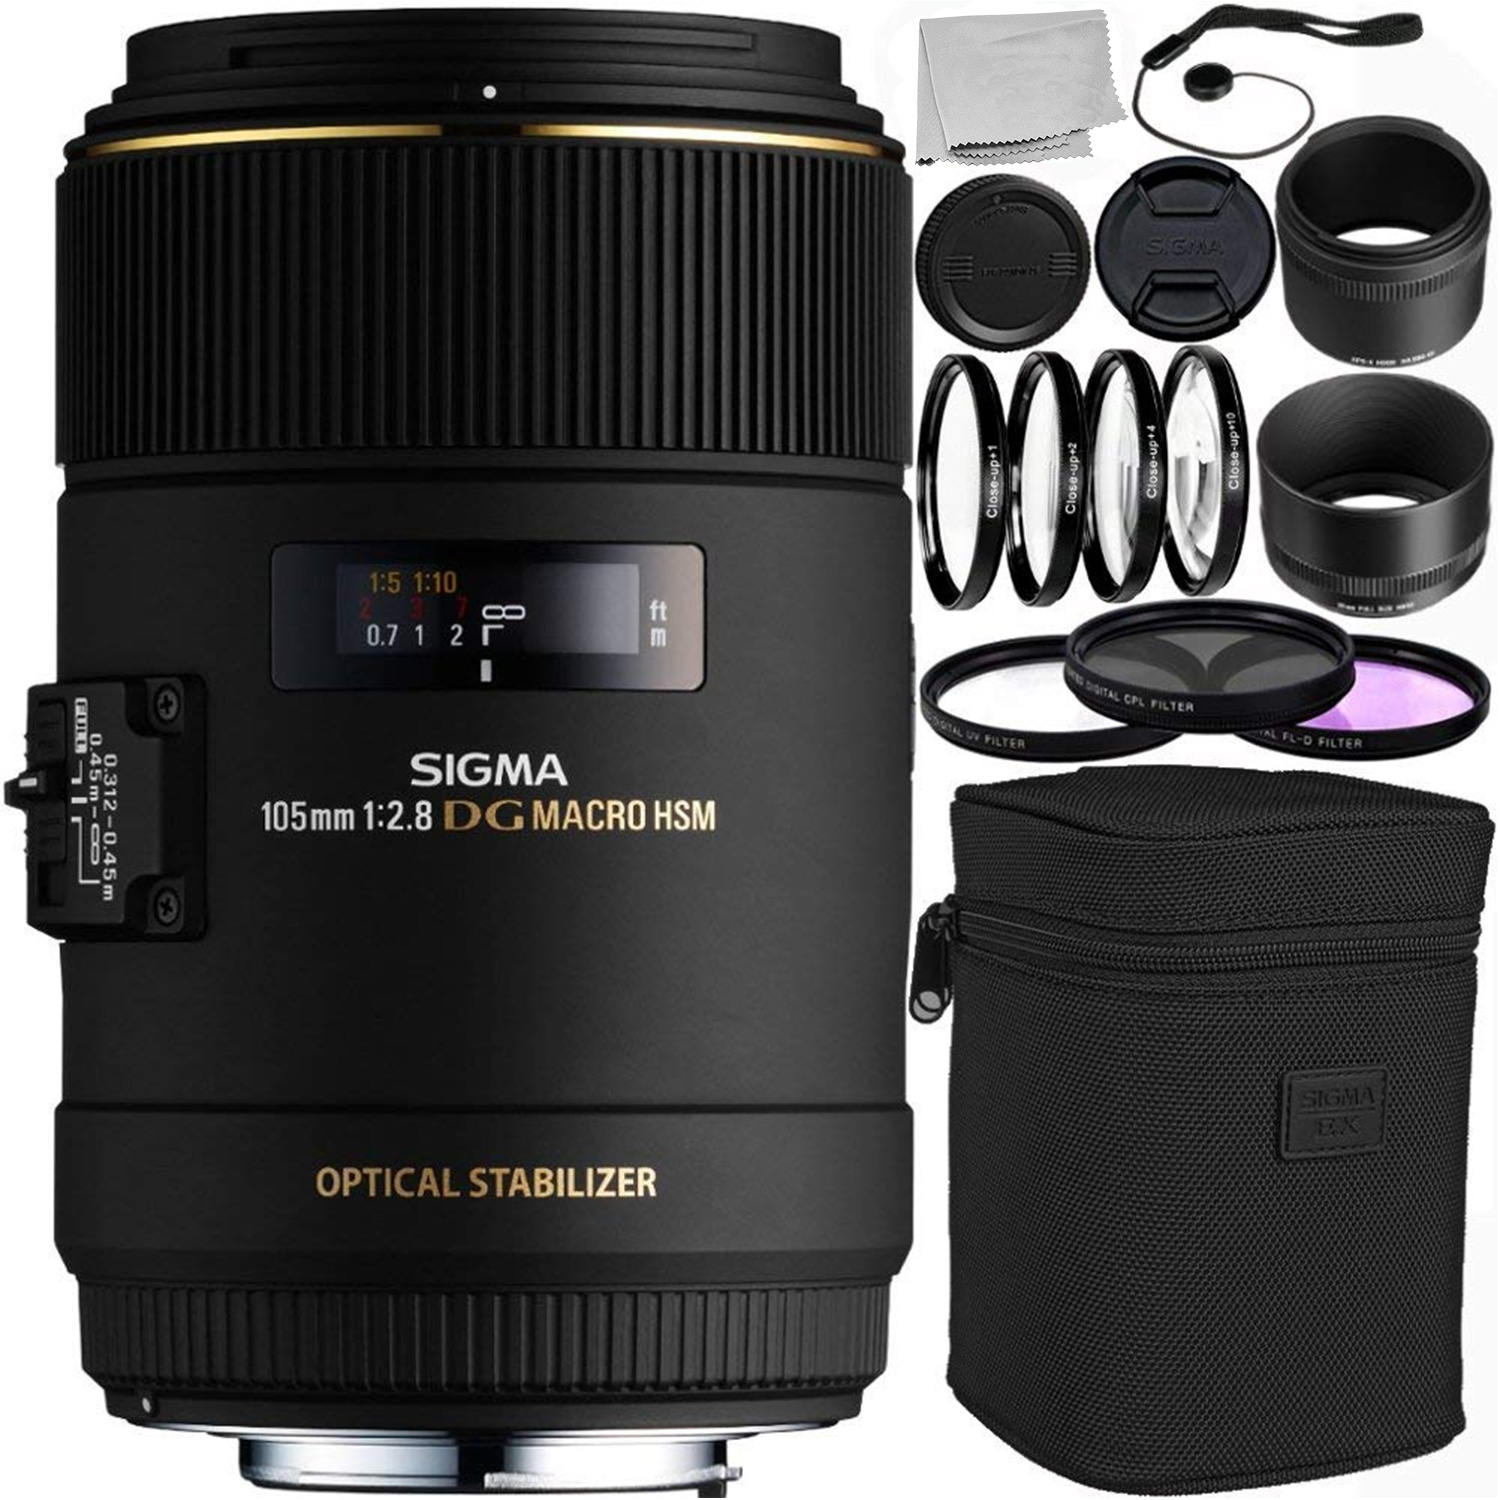 Sigma 105mm f/2.8 EX DG OS HSM Macro Lens for Canon EOS Cameras with 9PC Accessory Bundle